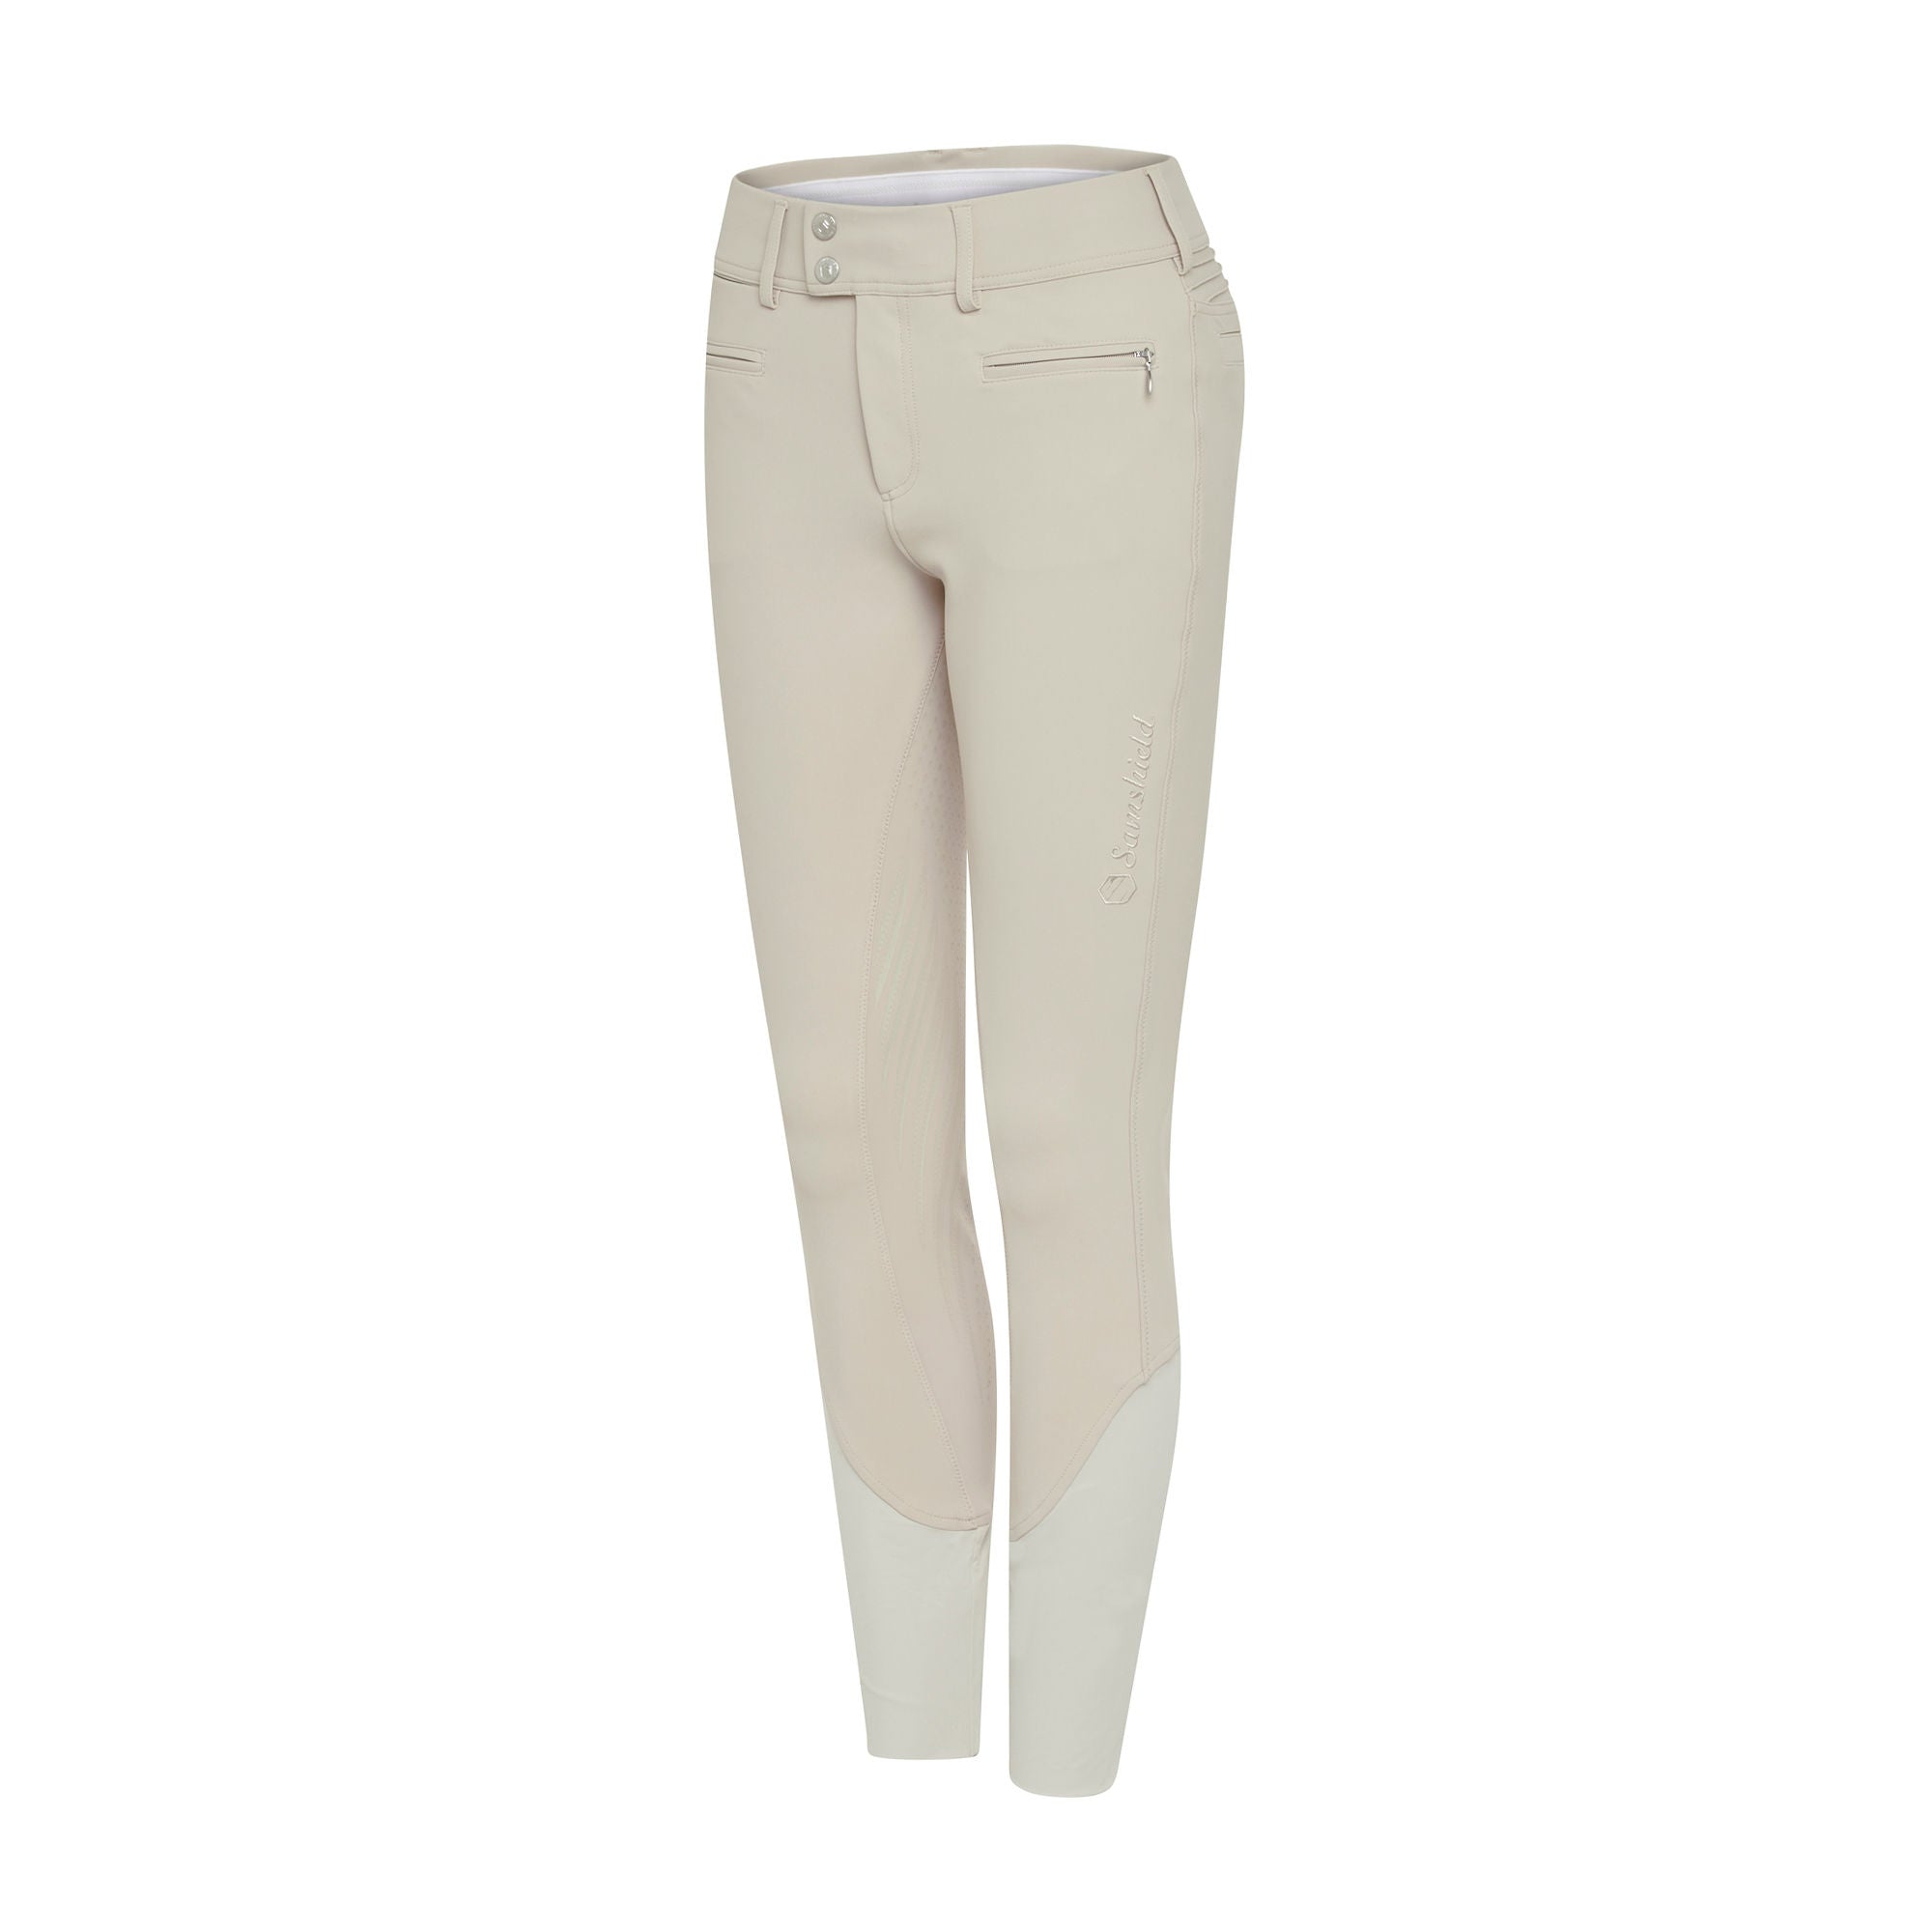 Samshield Women's Chloe Embroidered Full Grip Breeches - The Tack Trunk